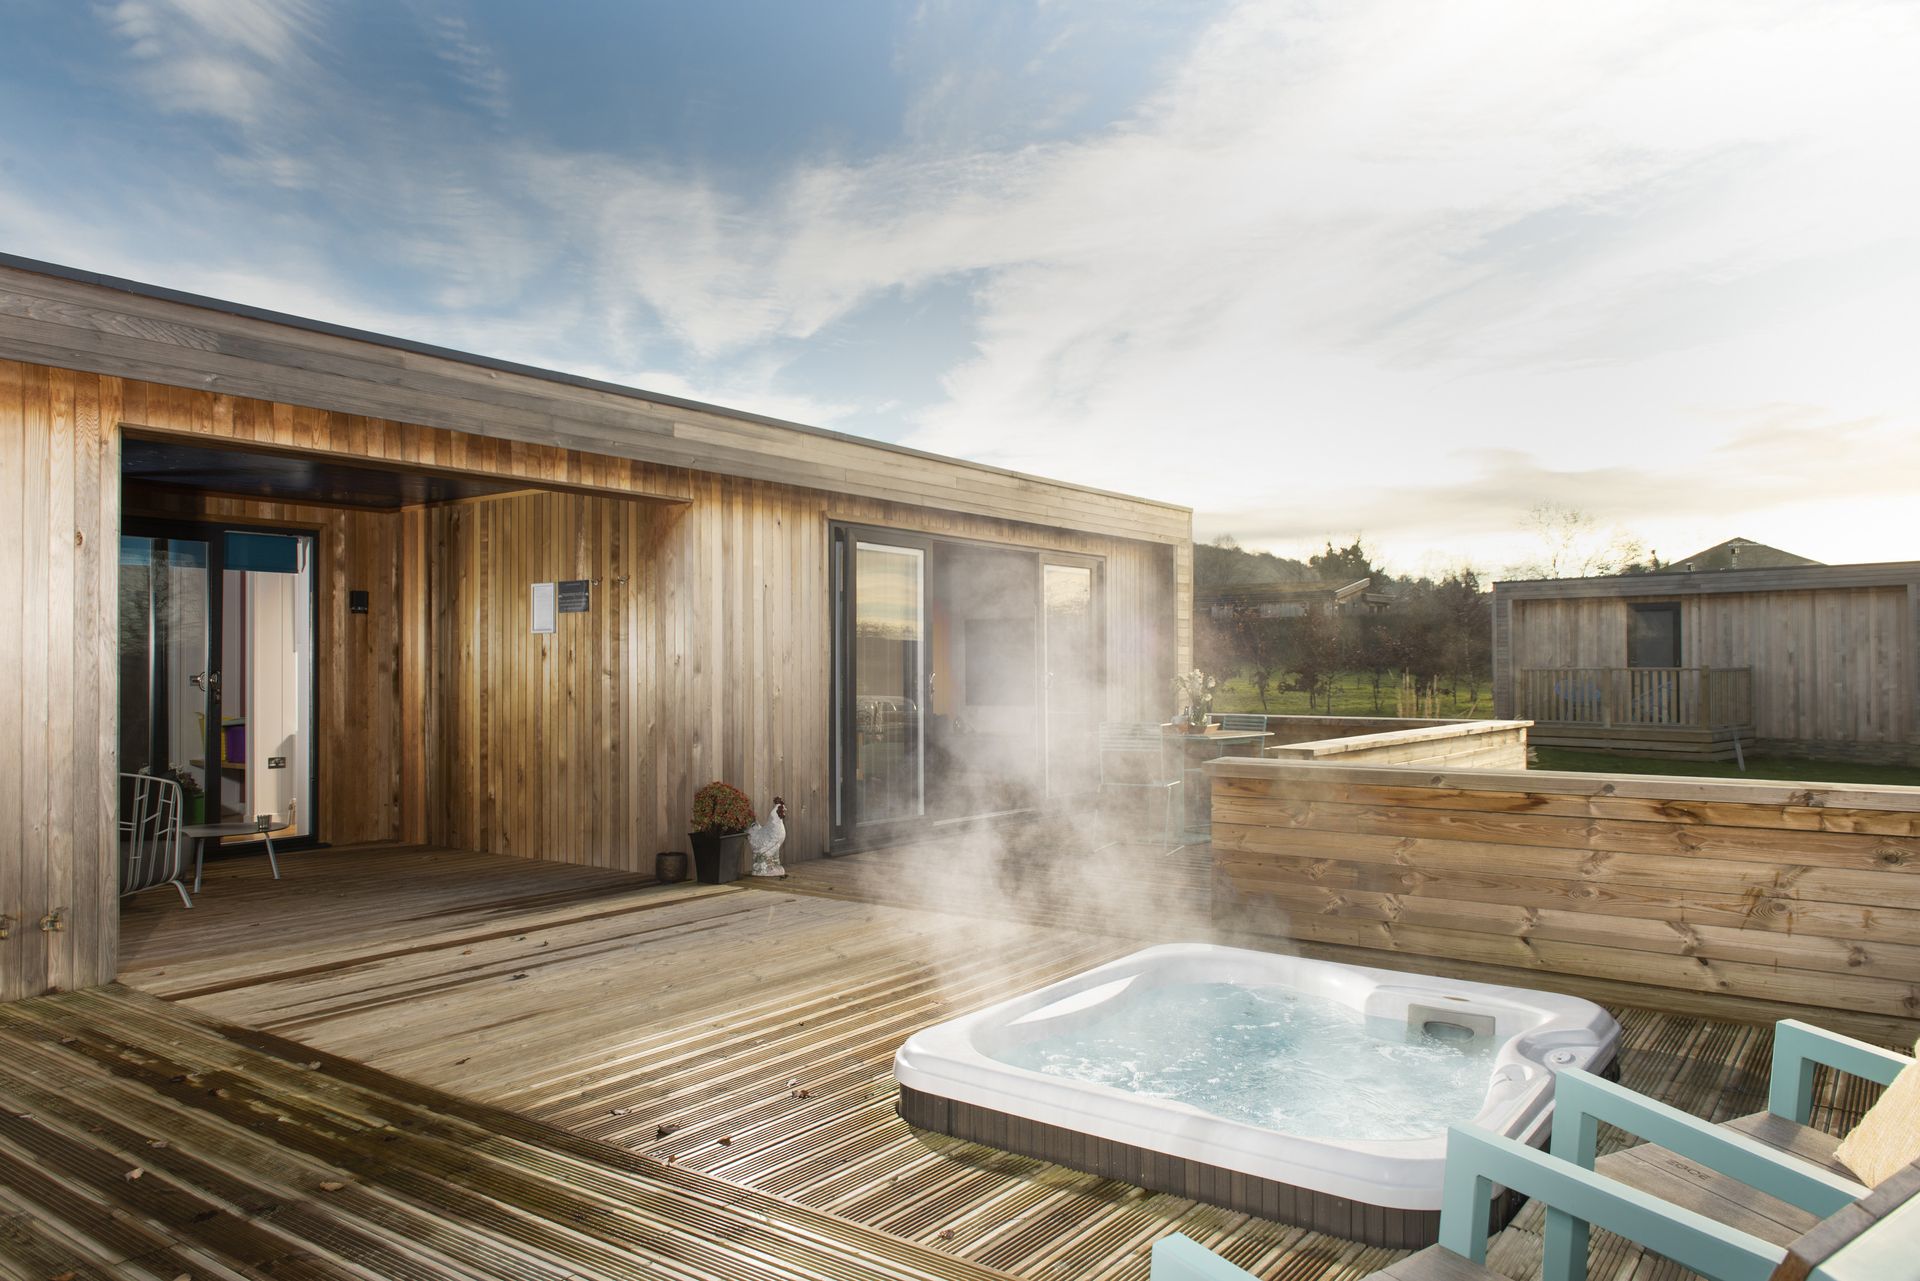 <p>                     If you love the idea of a bubbling pool, but don't want your spa to dominate the aesthetic of your garden, then sinking one into decking is a chic and understated option. Hot tub decks are also great for outdoor-indoor living, as you can enjoy uninterrupted views of your plot from inside the house.                   </p>                                      <p>                     Plus, decking is all the rage right now, being super practical as well as stylish. Just ensure you opt for a version that has plenty of grip underfoot when it gets wet.                   </p>